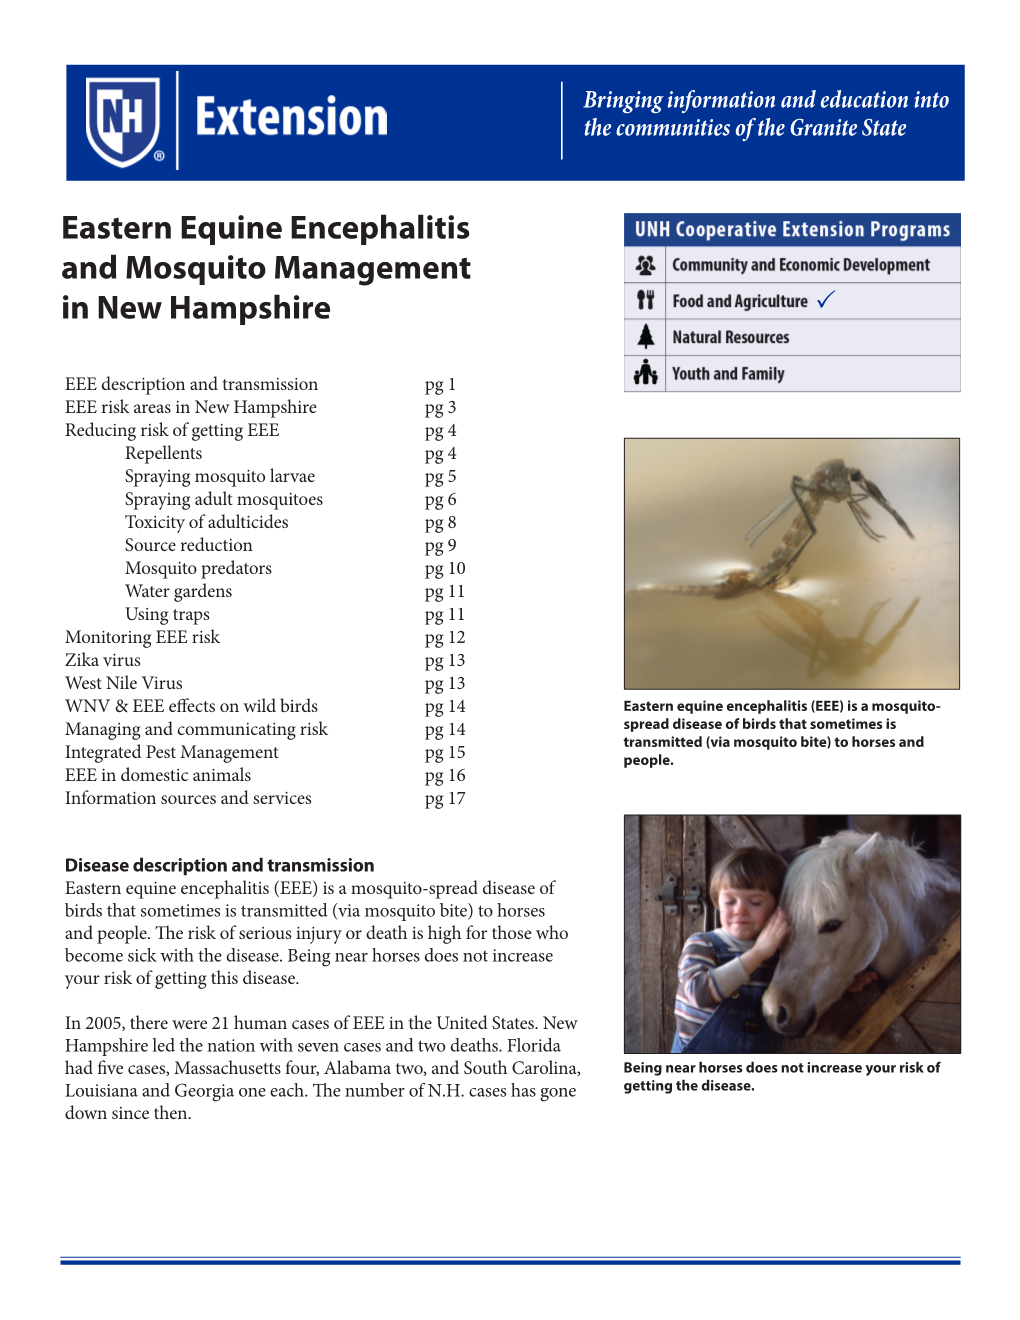 Eastern Equine Encephalitis and Mosquito Management in New Hampshire 